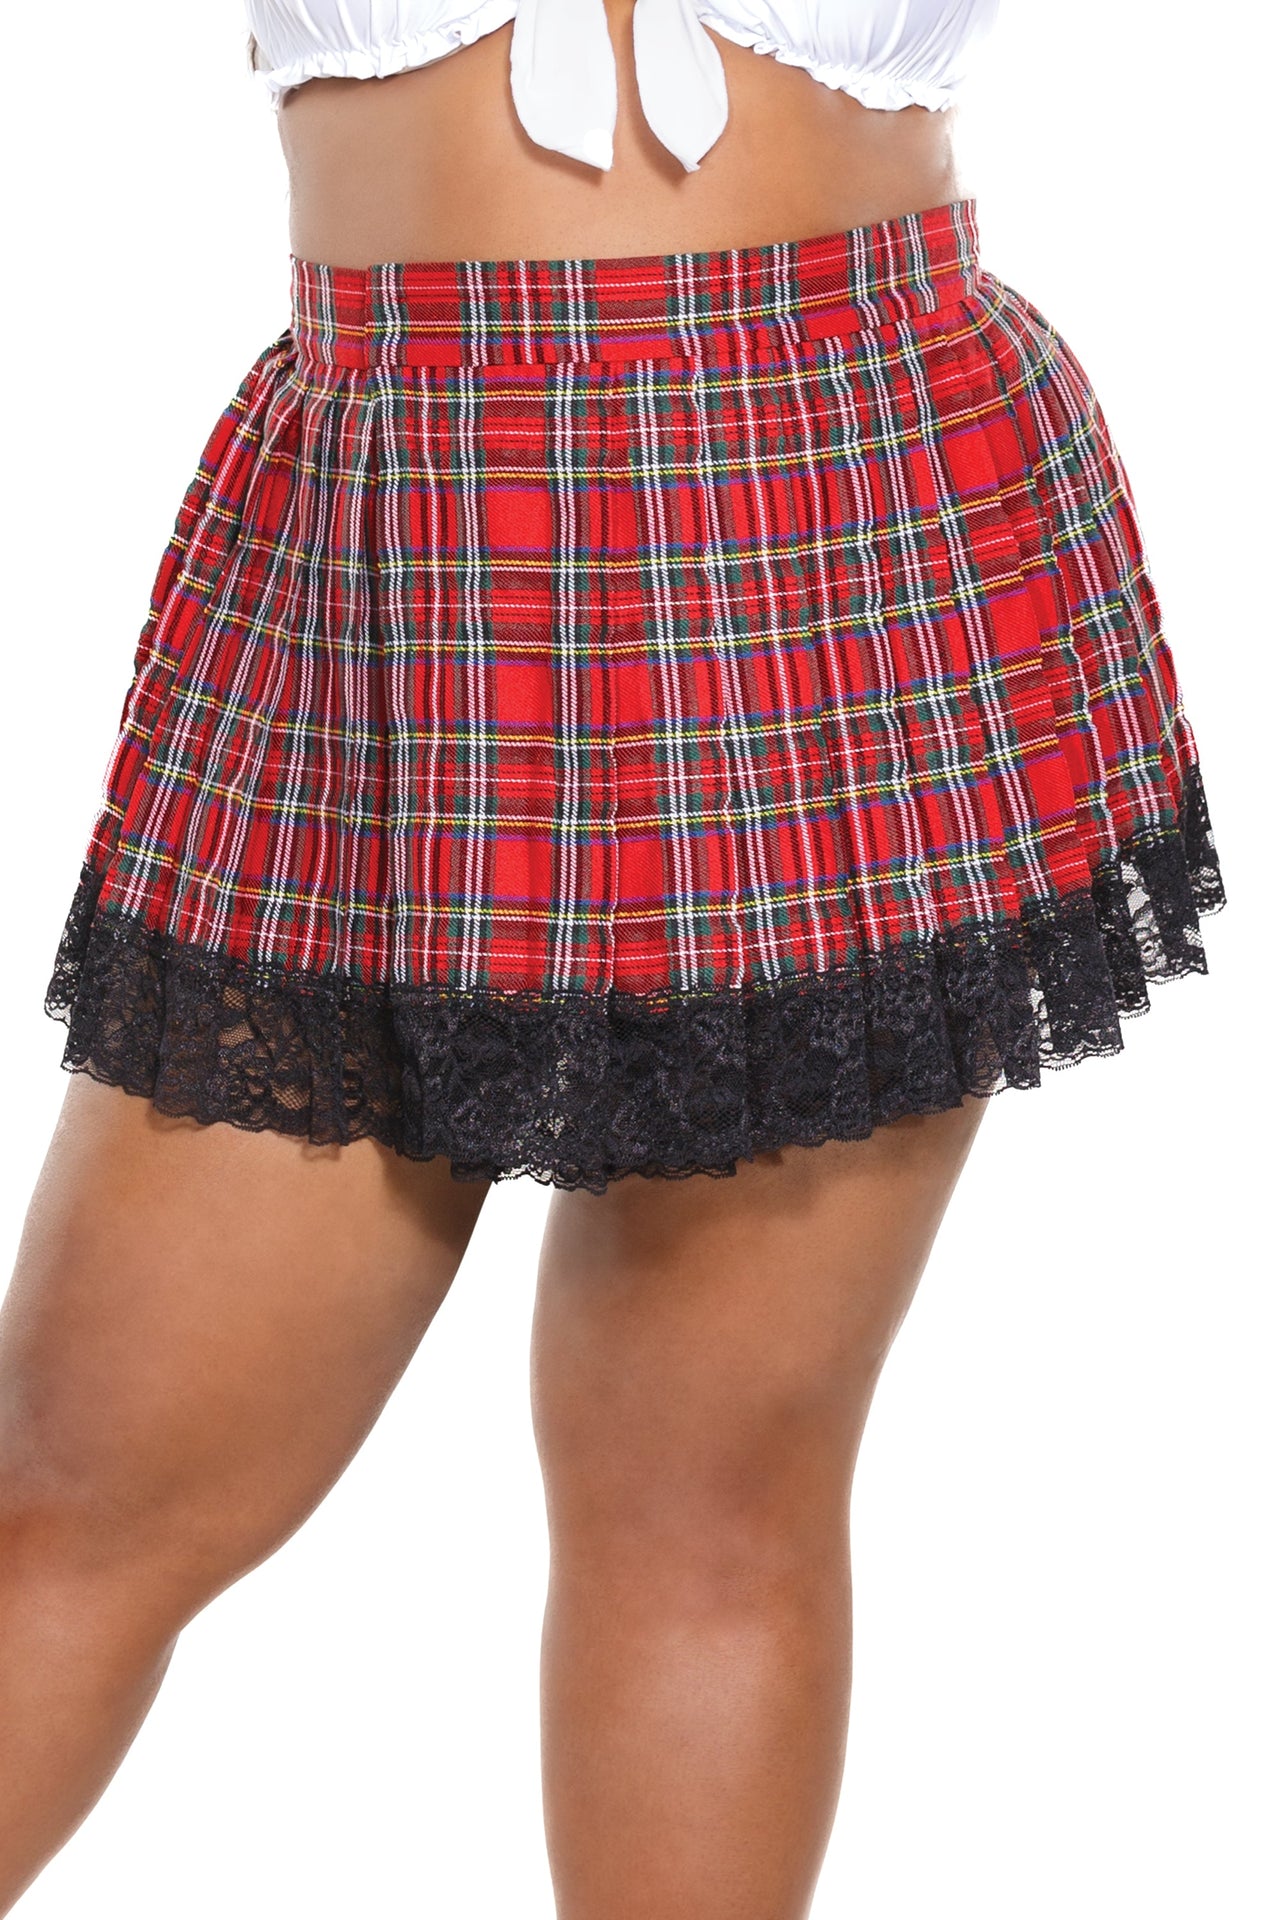 23170X - Pleated Skirt - OS/XL - Stag Shop